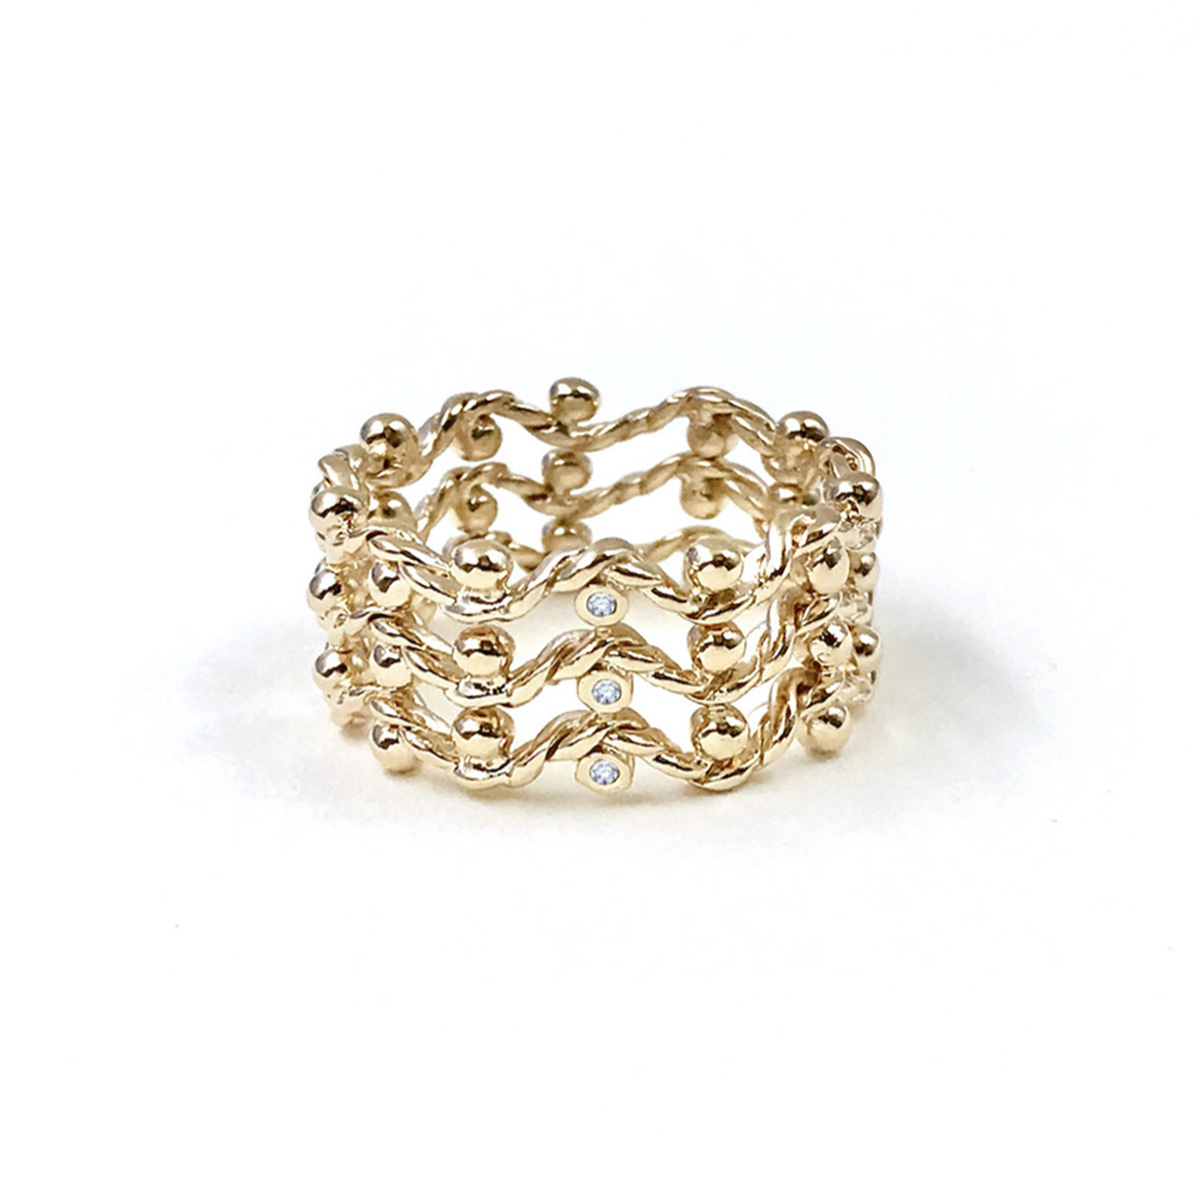 triple-twist-wave-bead-open-lace-band-diamond-accent-jewelyrie-YG